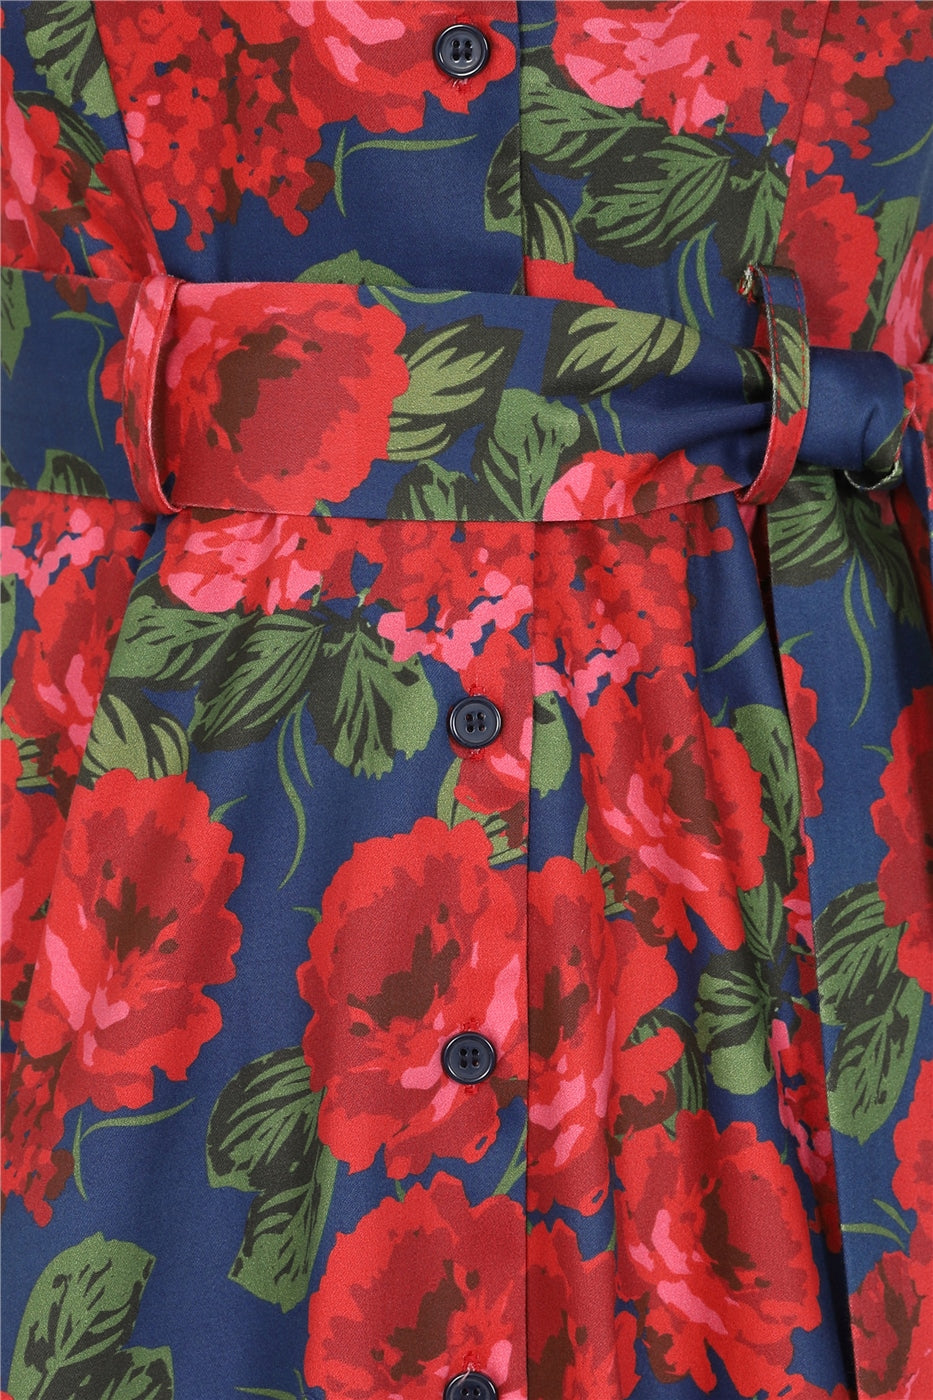 Shana Roses Swing Dress by Collectif